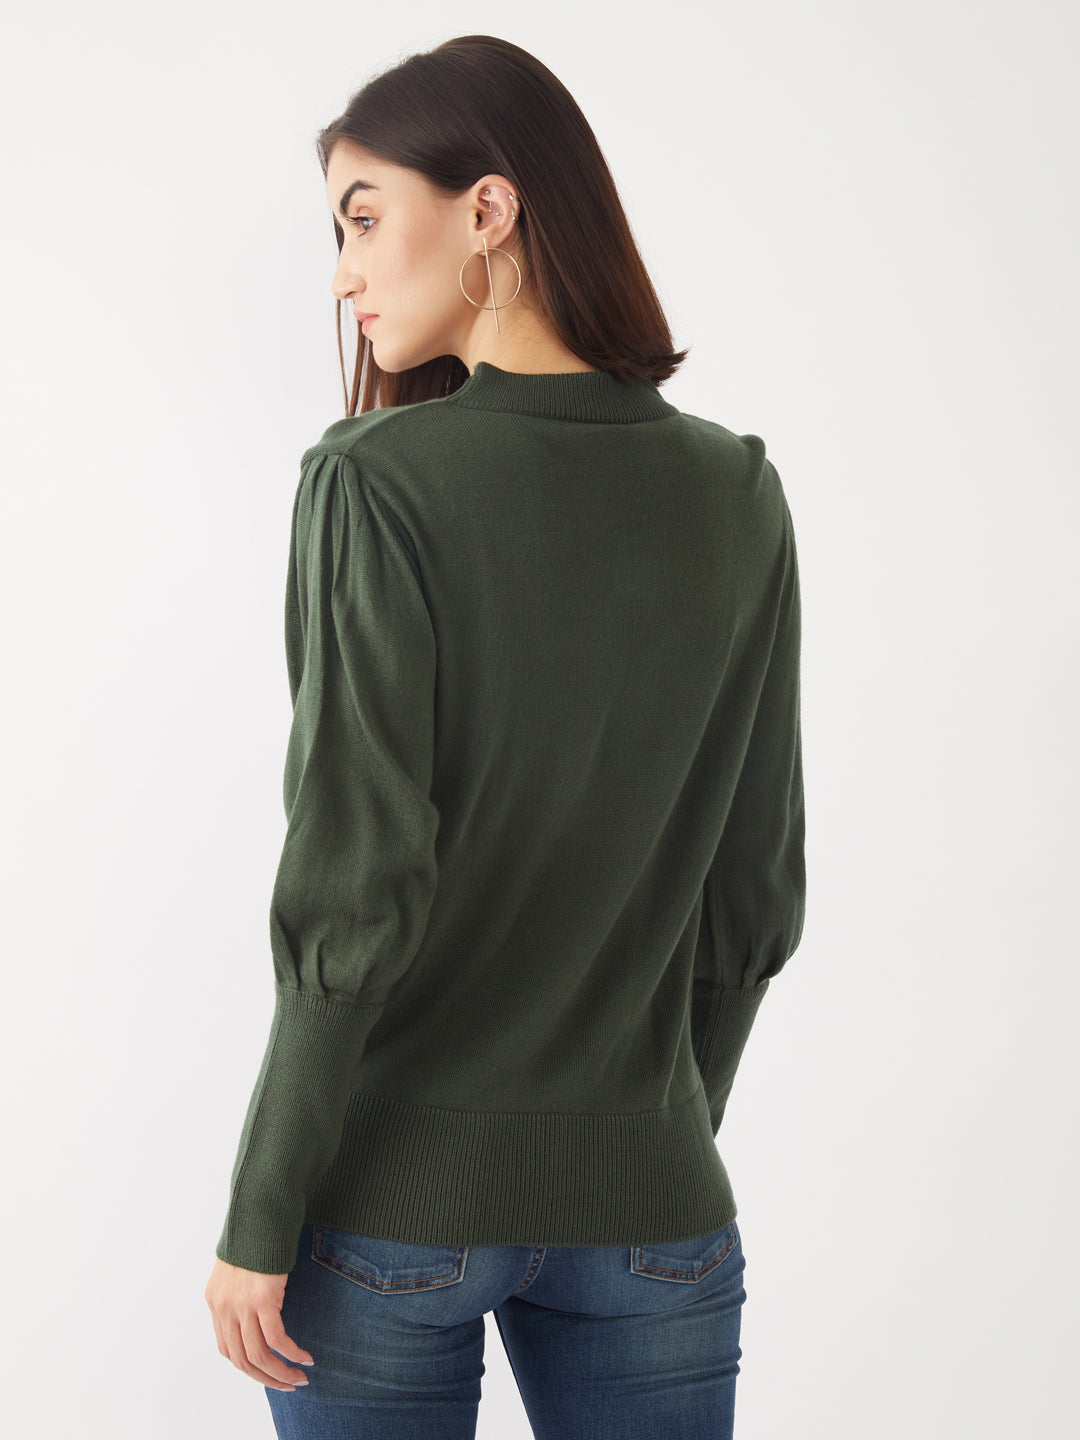 Green Solid Sweater For Women